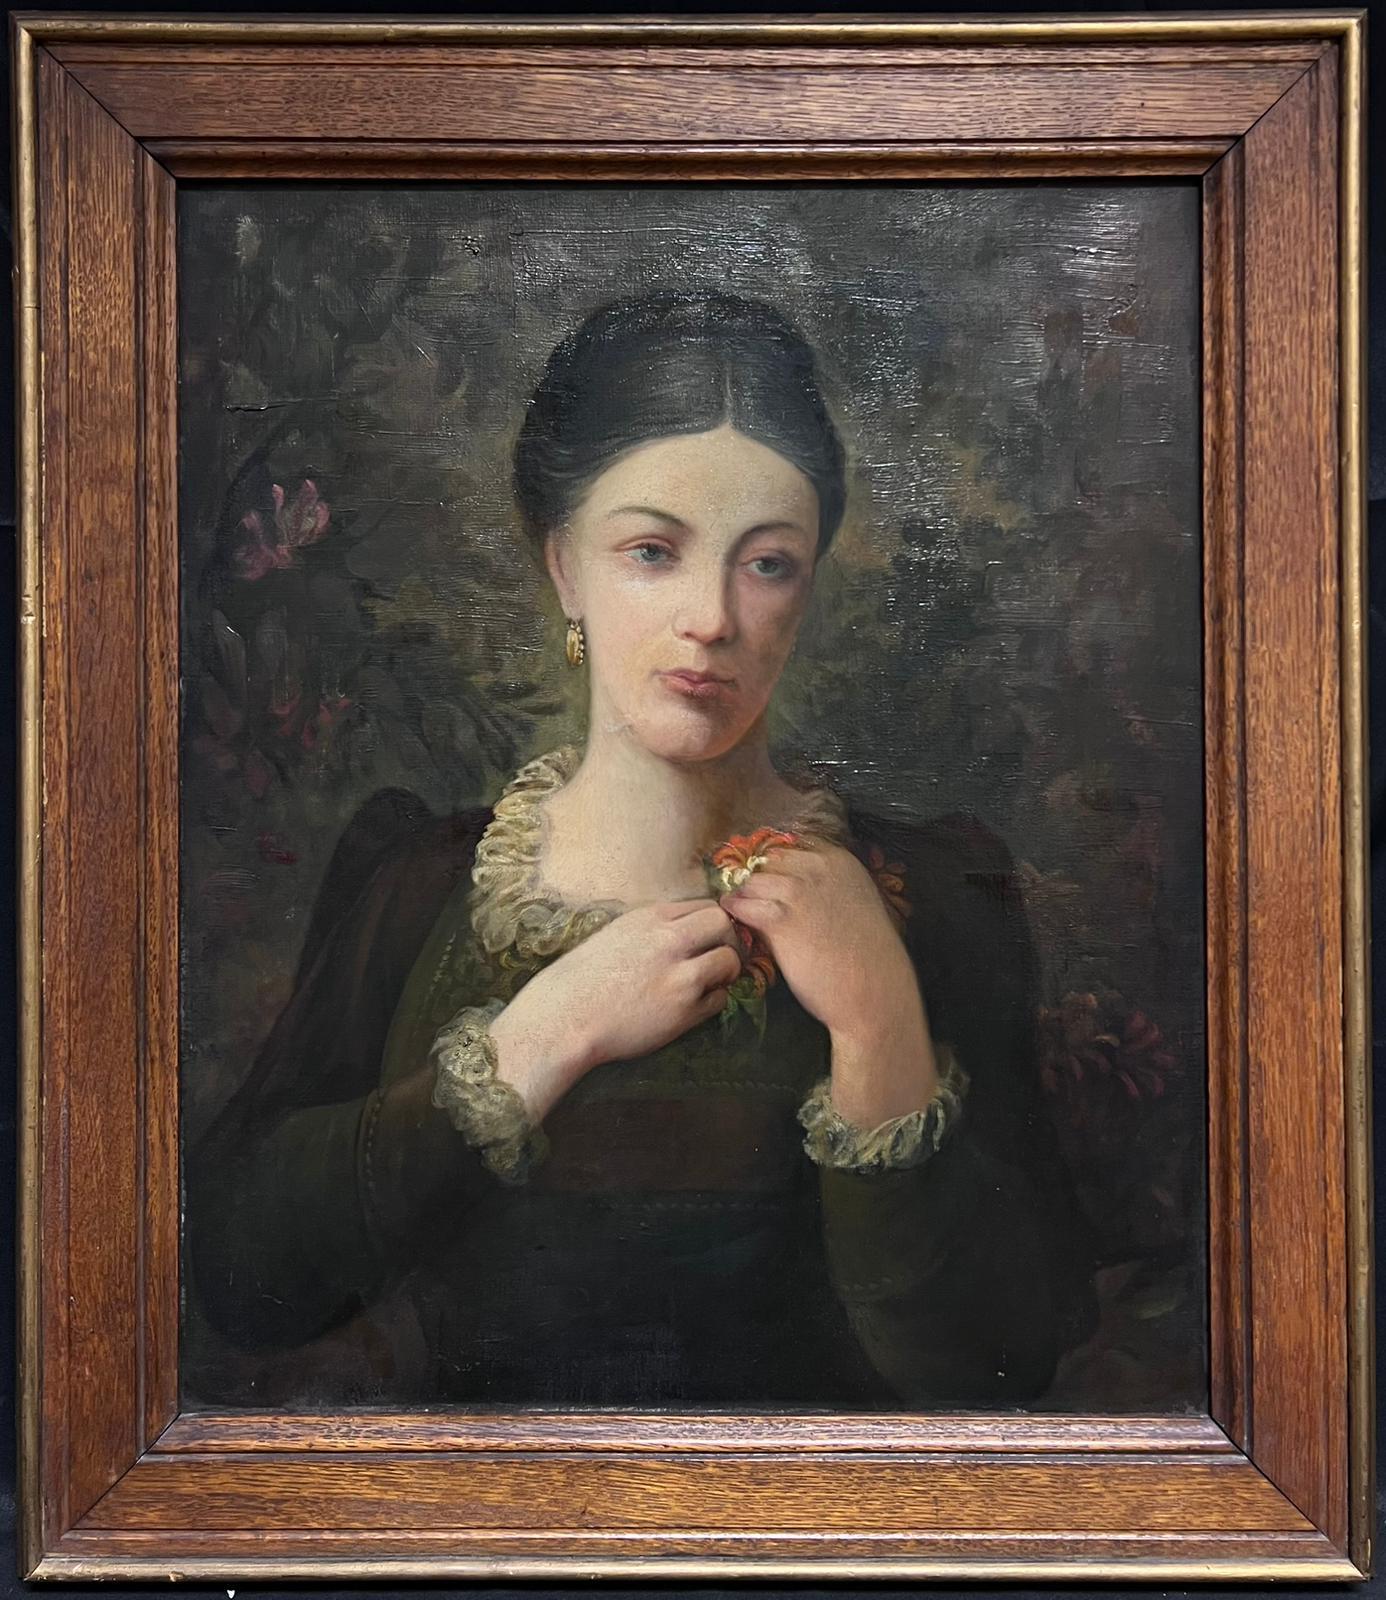 Portrait of an Elegant Lady
British School, late 19th/ early 20th century - circa 1900
oil on canvas, framed in oak wood frame
framed: 30 x 26 inches
canvas : 24 x 20 inches
provenance: private collection, UK
condition: very good and sound condition